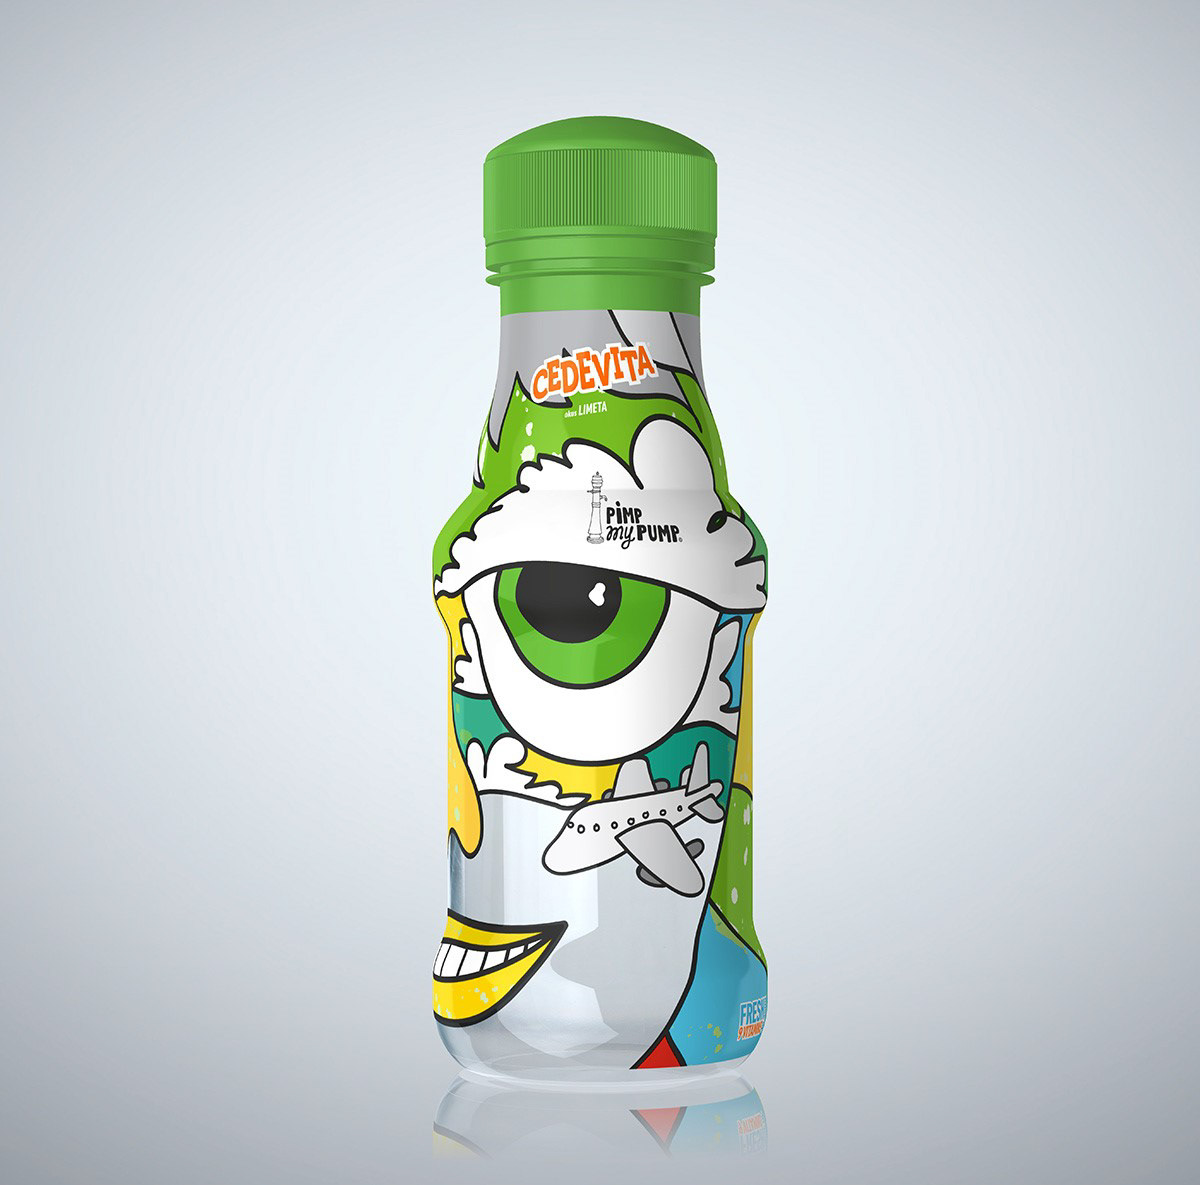 drinks product design  illustrations drawings graphic design  copywrite